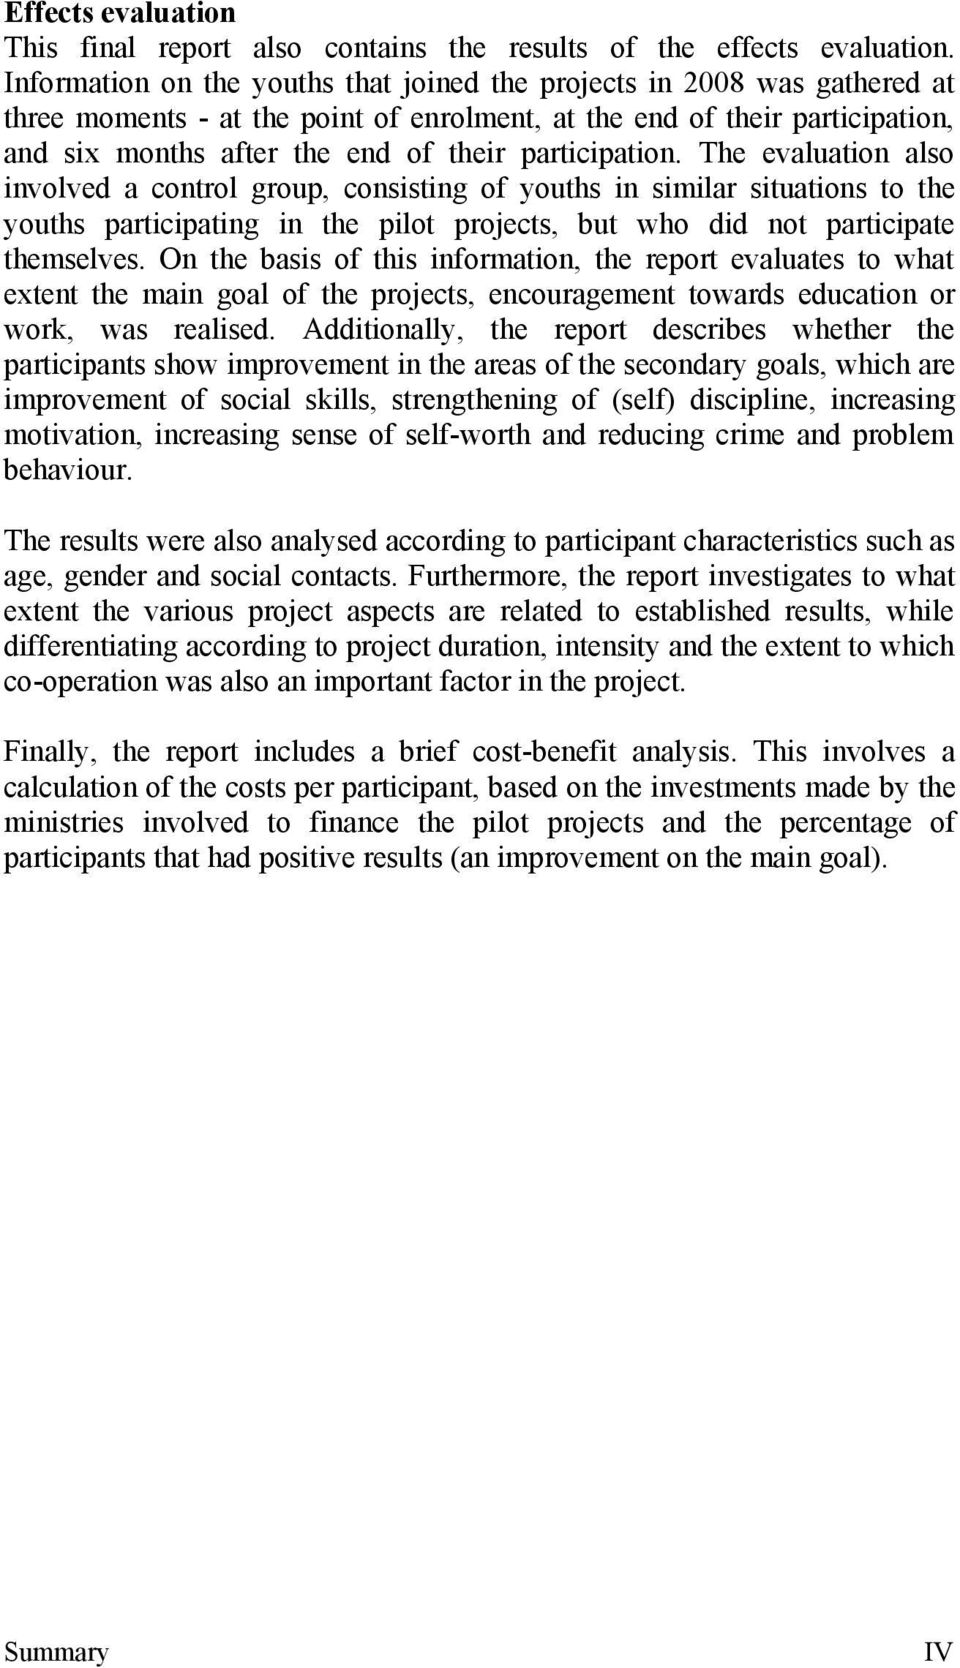 participation. The evaluation also involved a control group, consisting of youths in similar situations to the youths participating in the pilot projects, but who did not participate themselves.